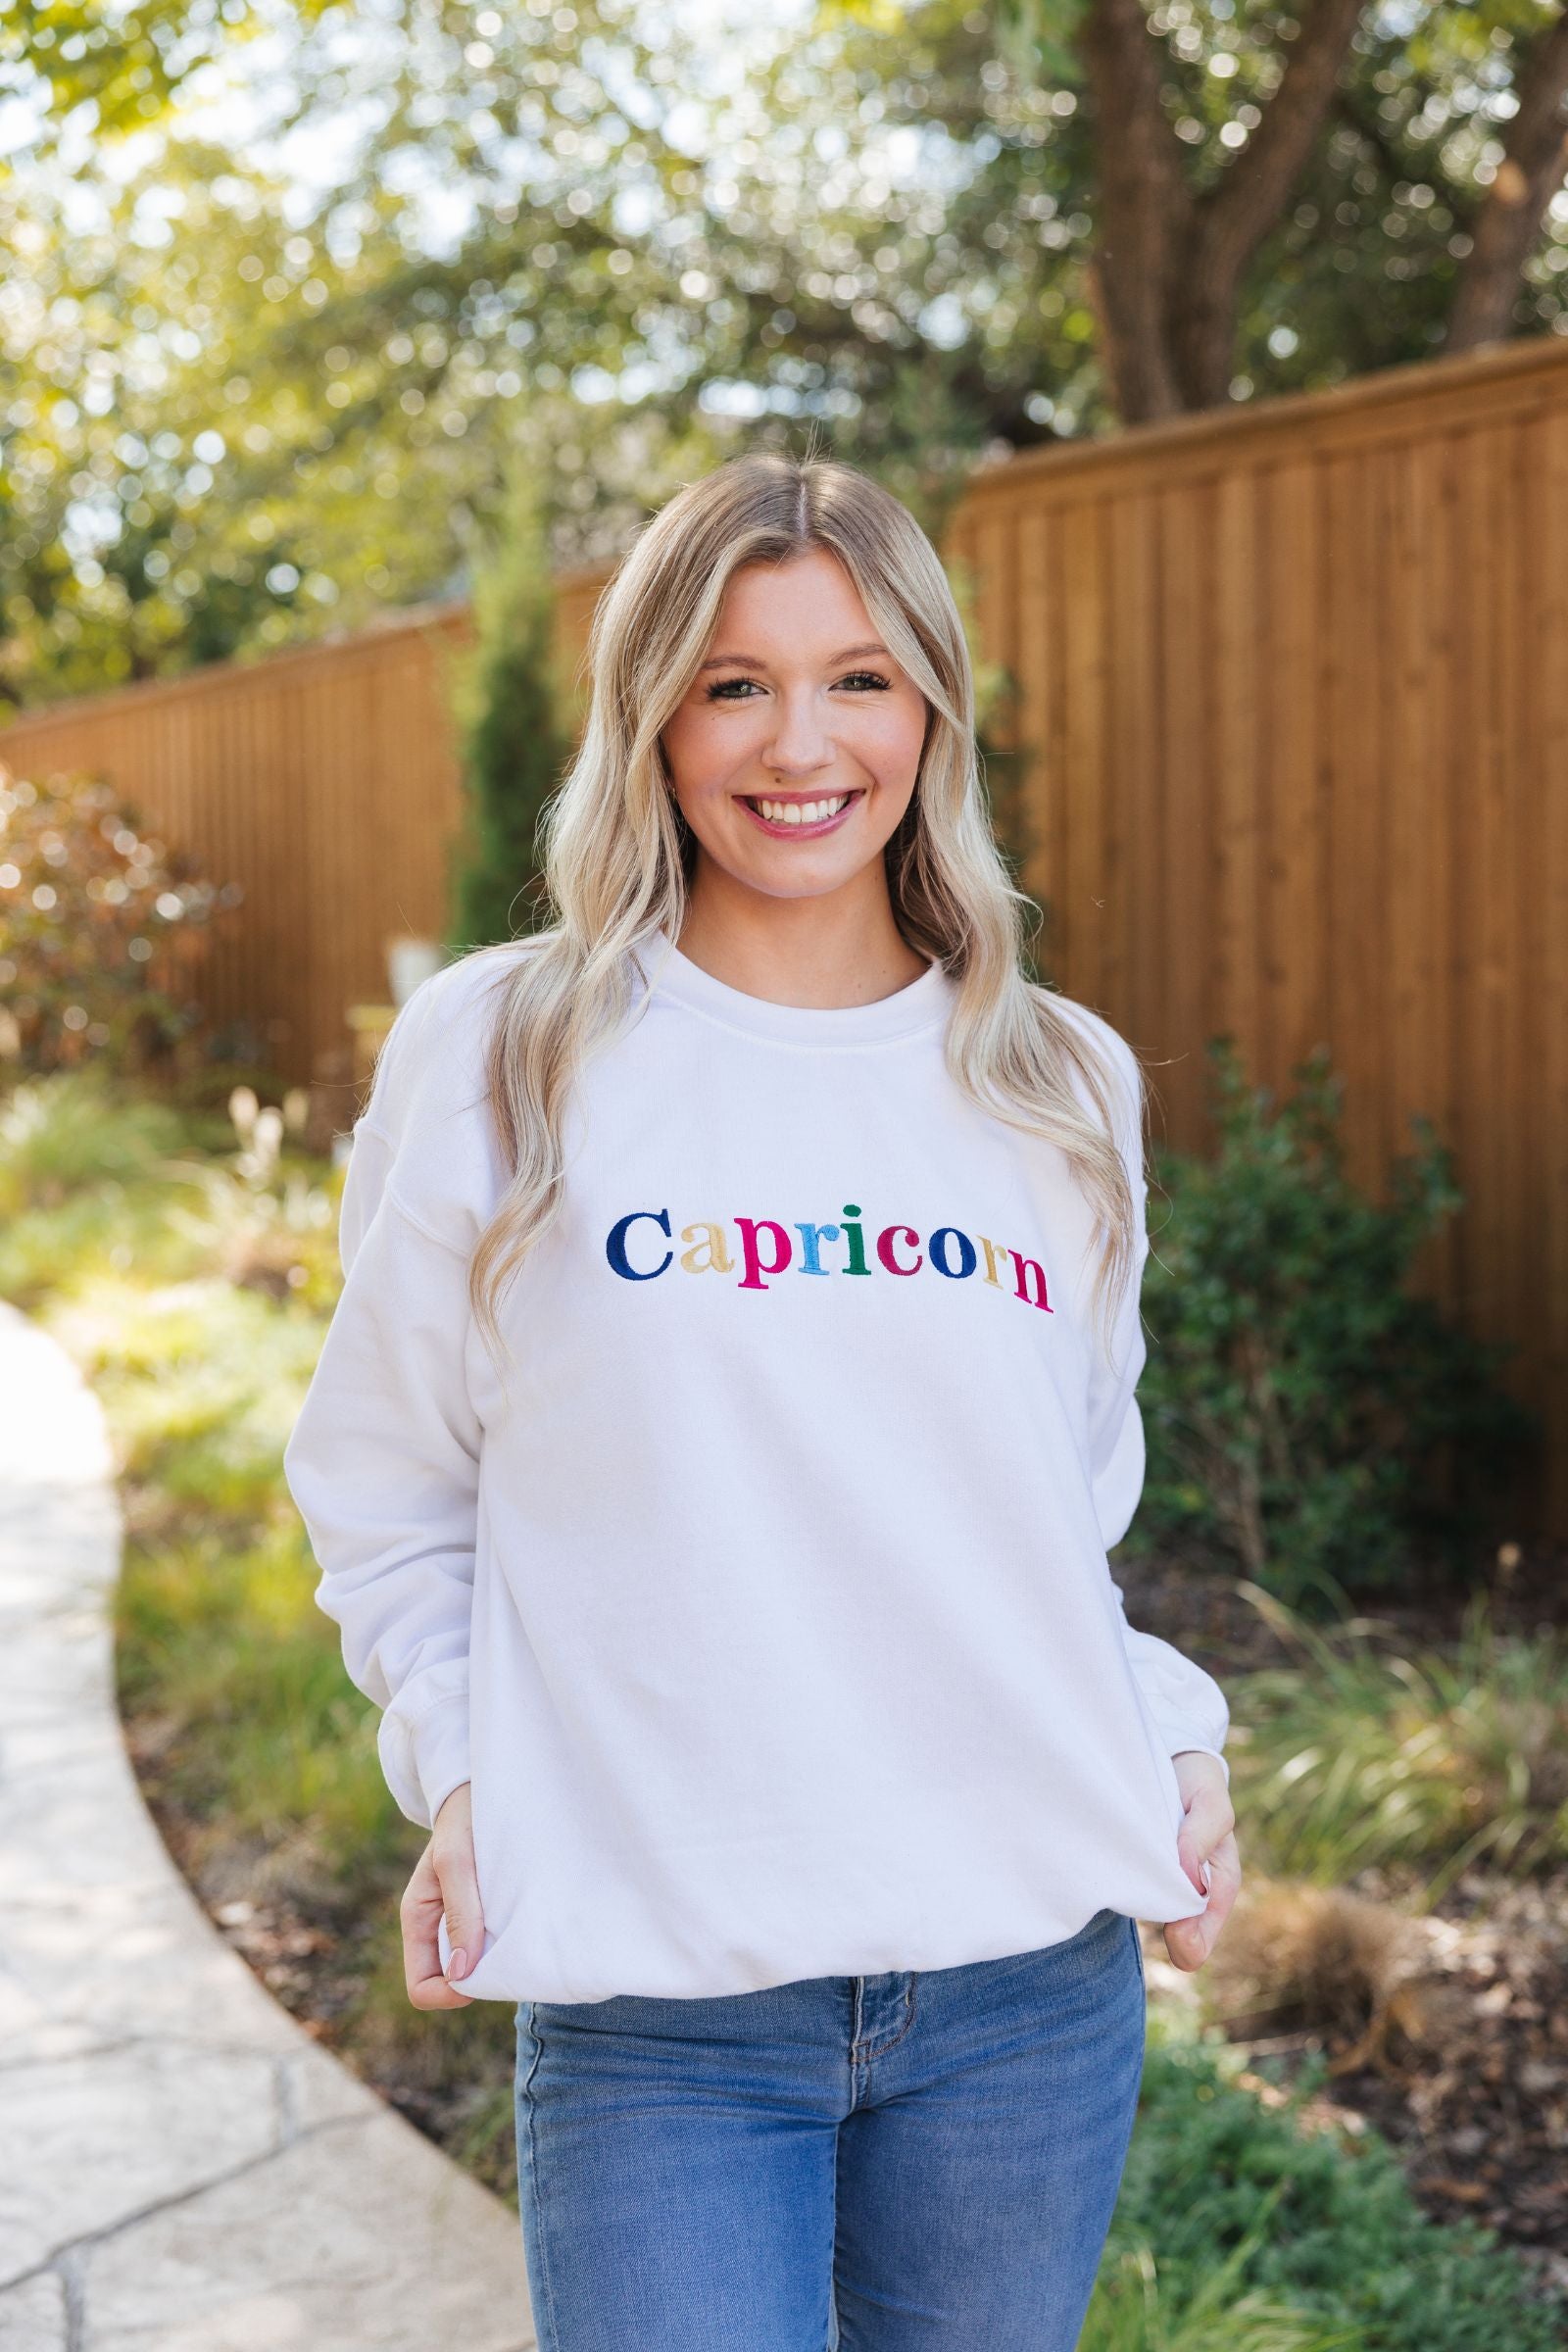 Multicolored Embroidered Sweatshirt - Sprinkled With Pink